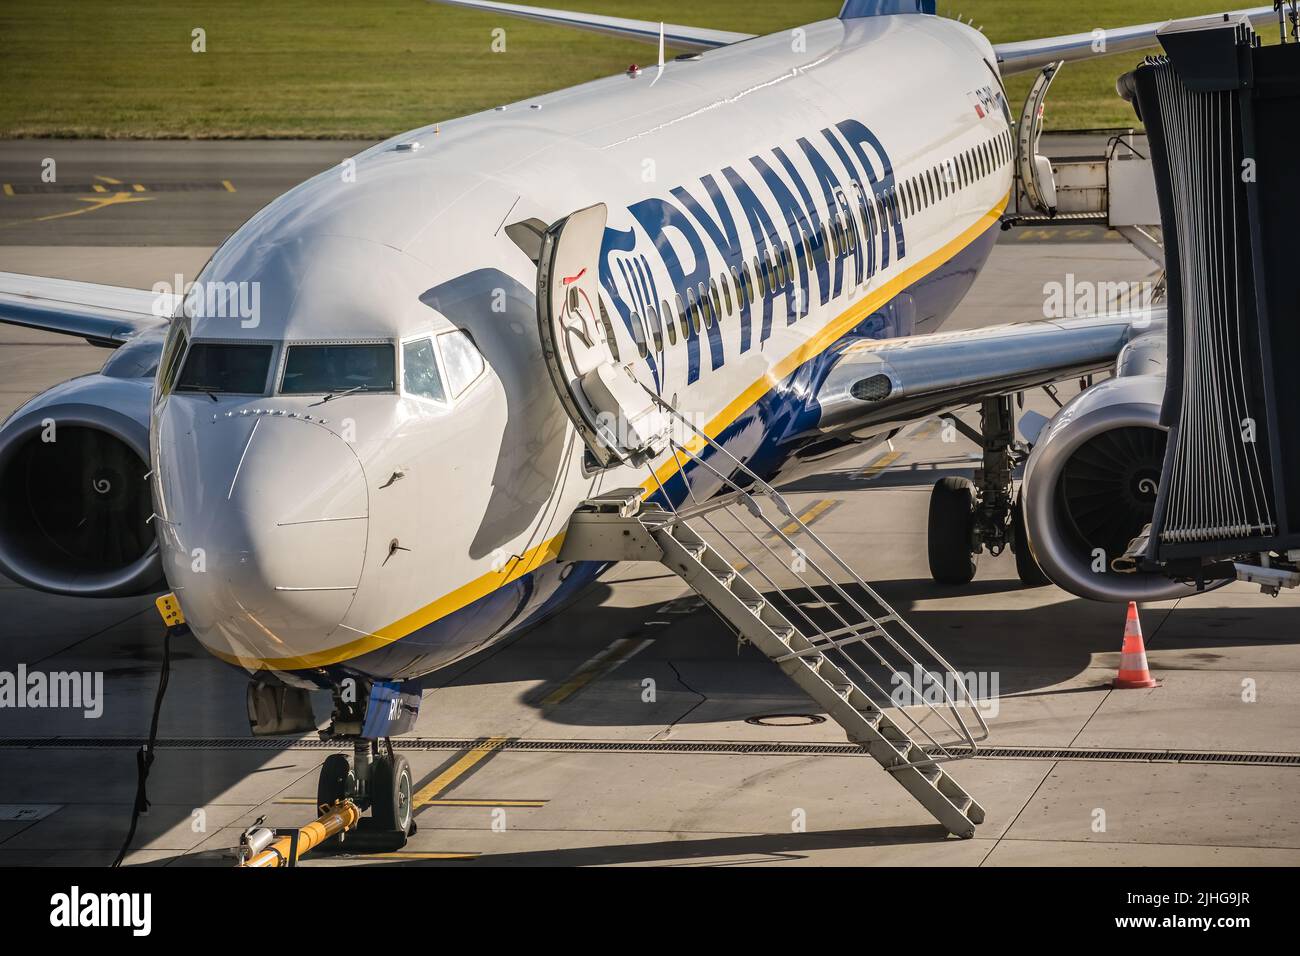 Wroclaw, Poland - August 2020 : Ryanair plane waiting for passengers at Wroclaw airport Stock Photo